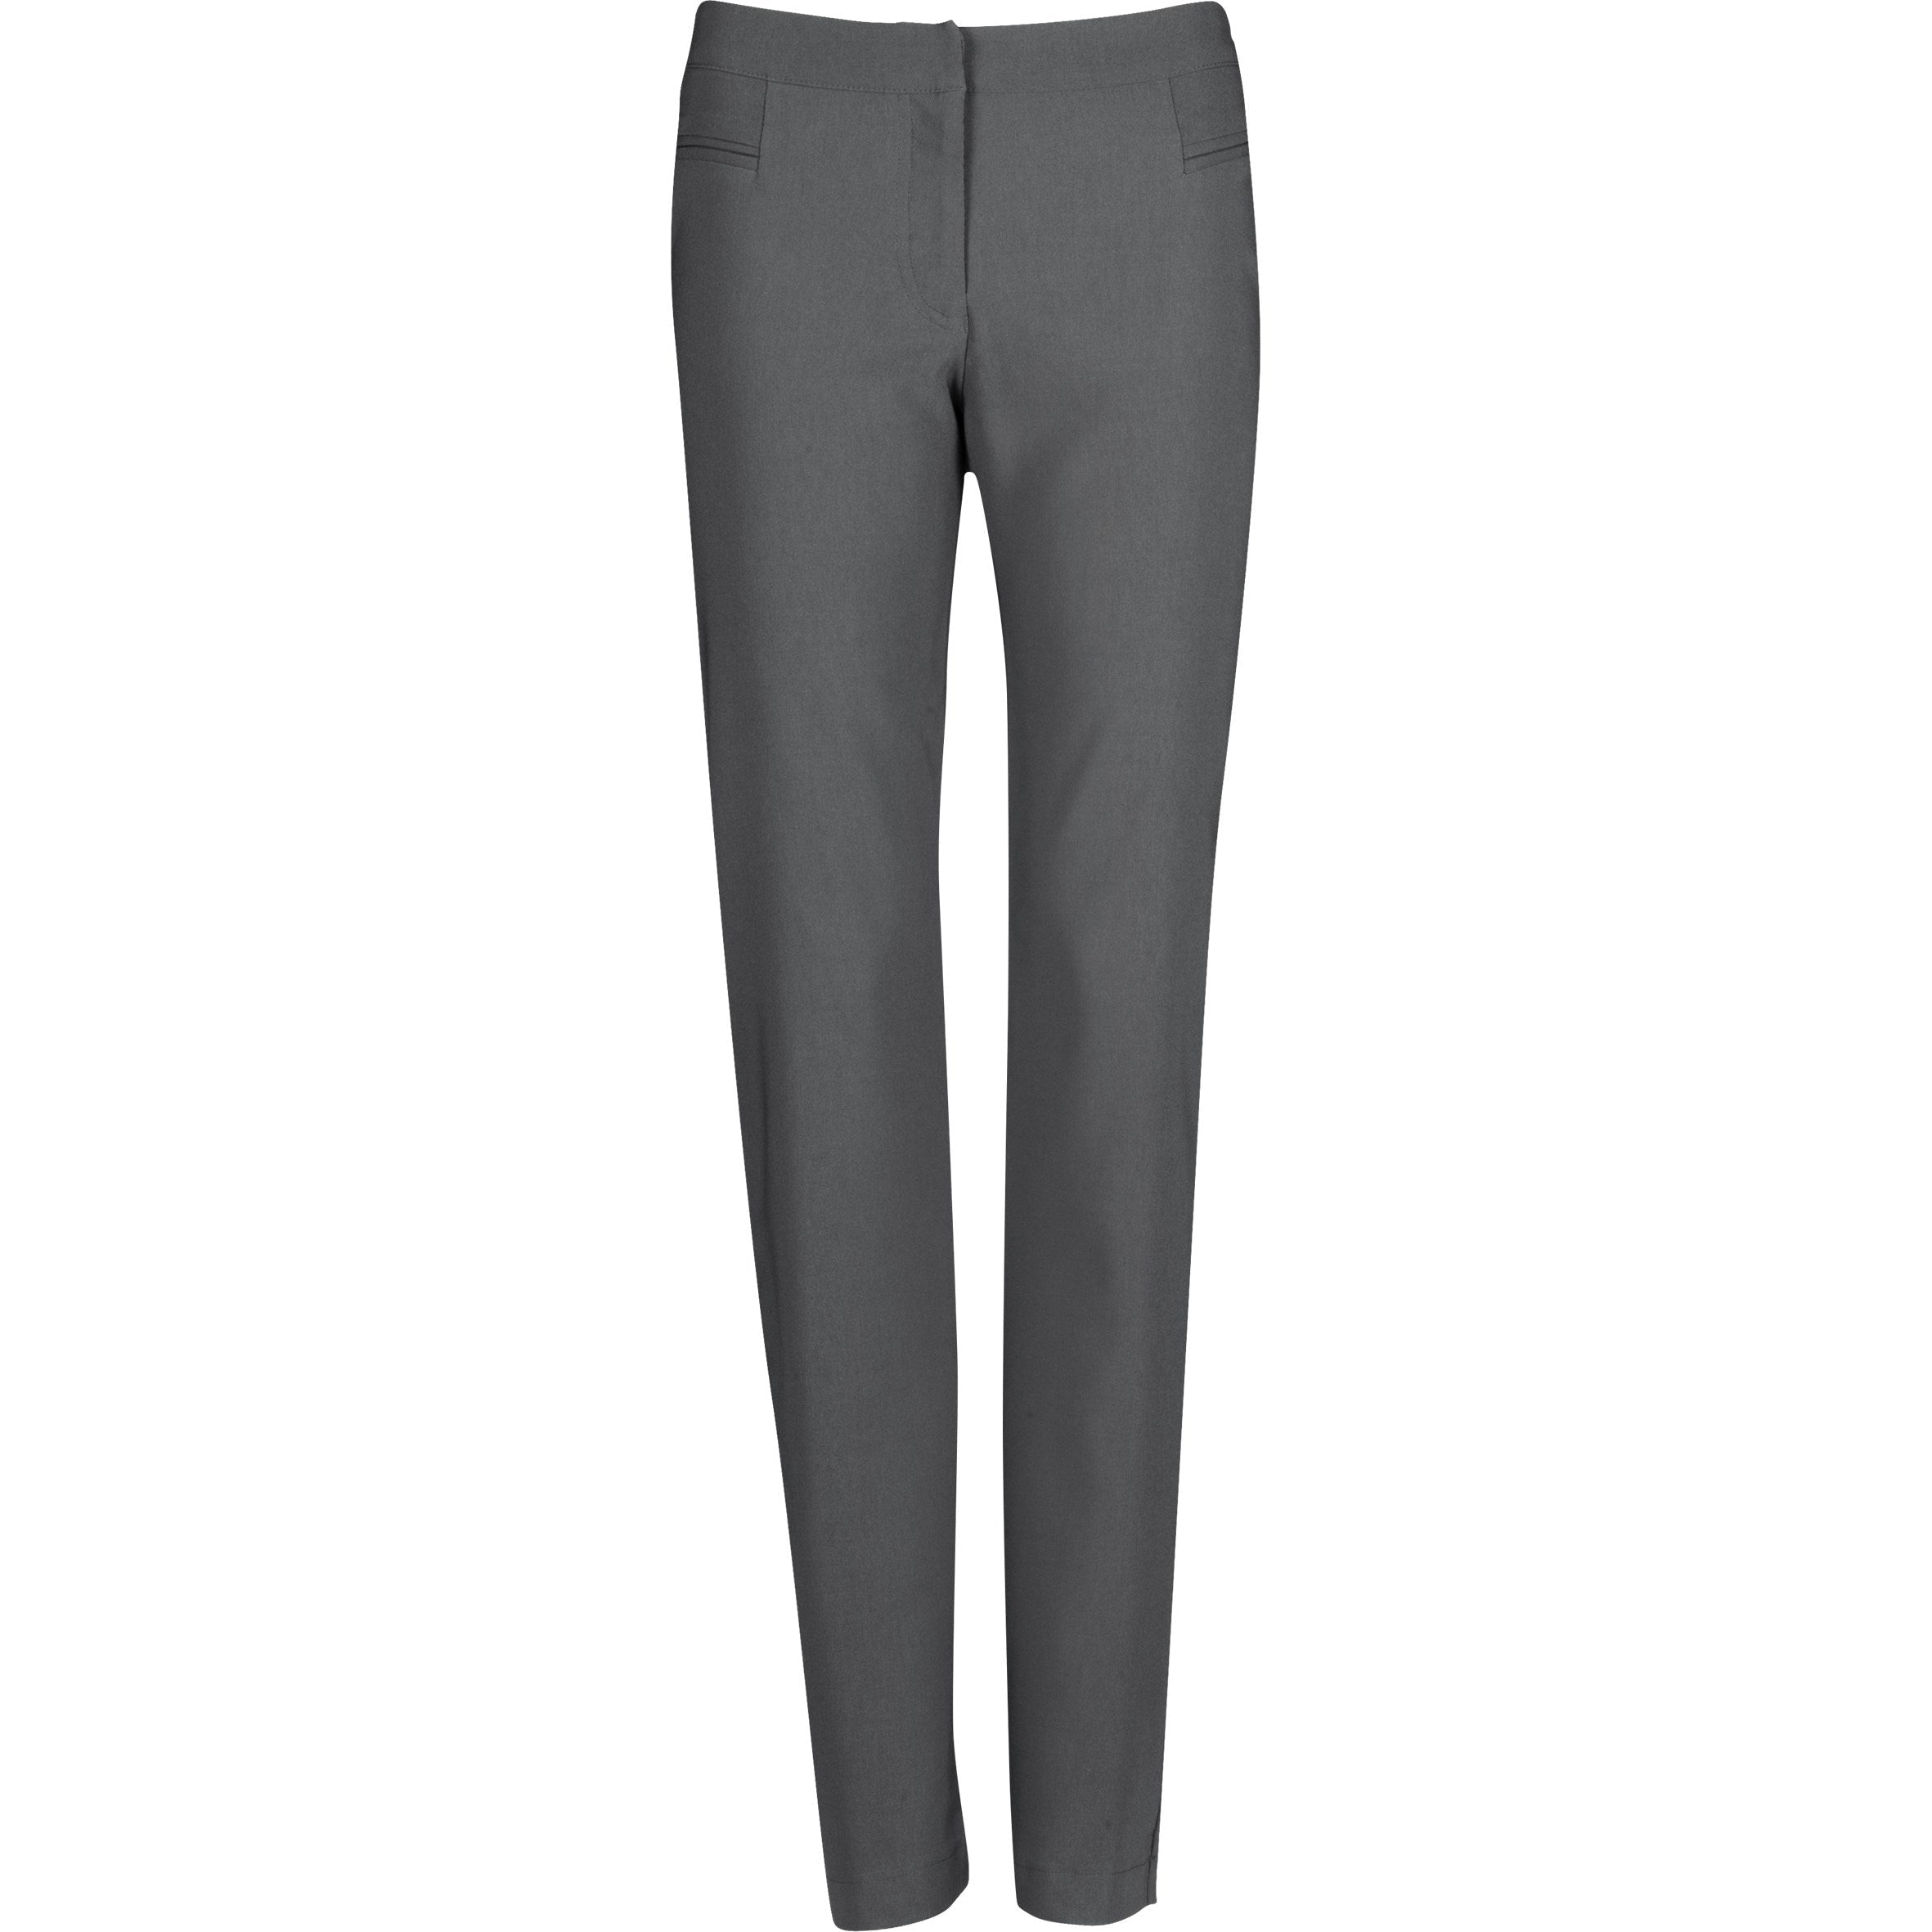 Ladies Cambridge Stretch Pants - Black Only-30-Grey-GY